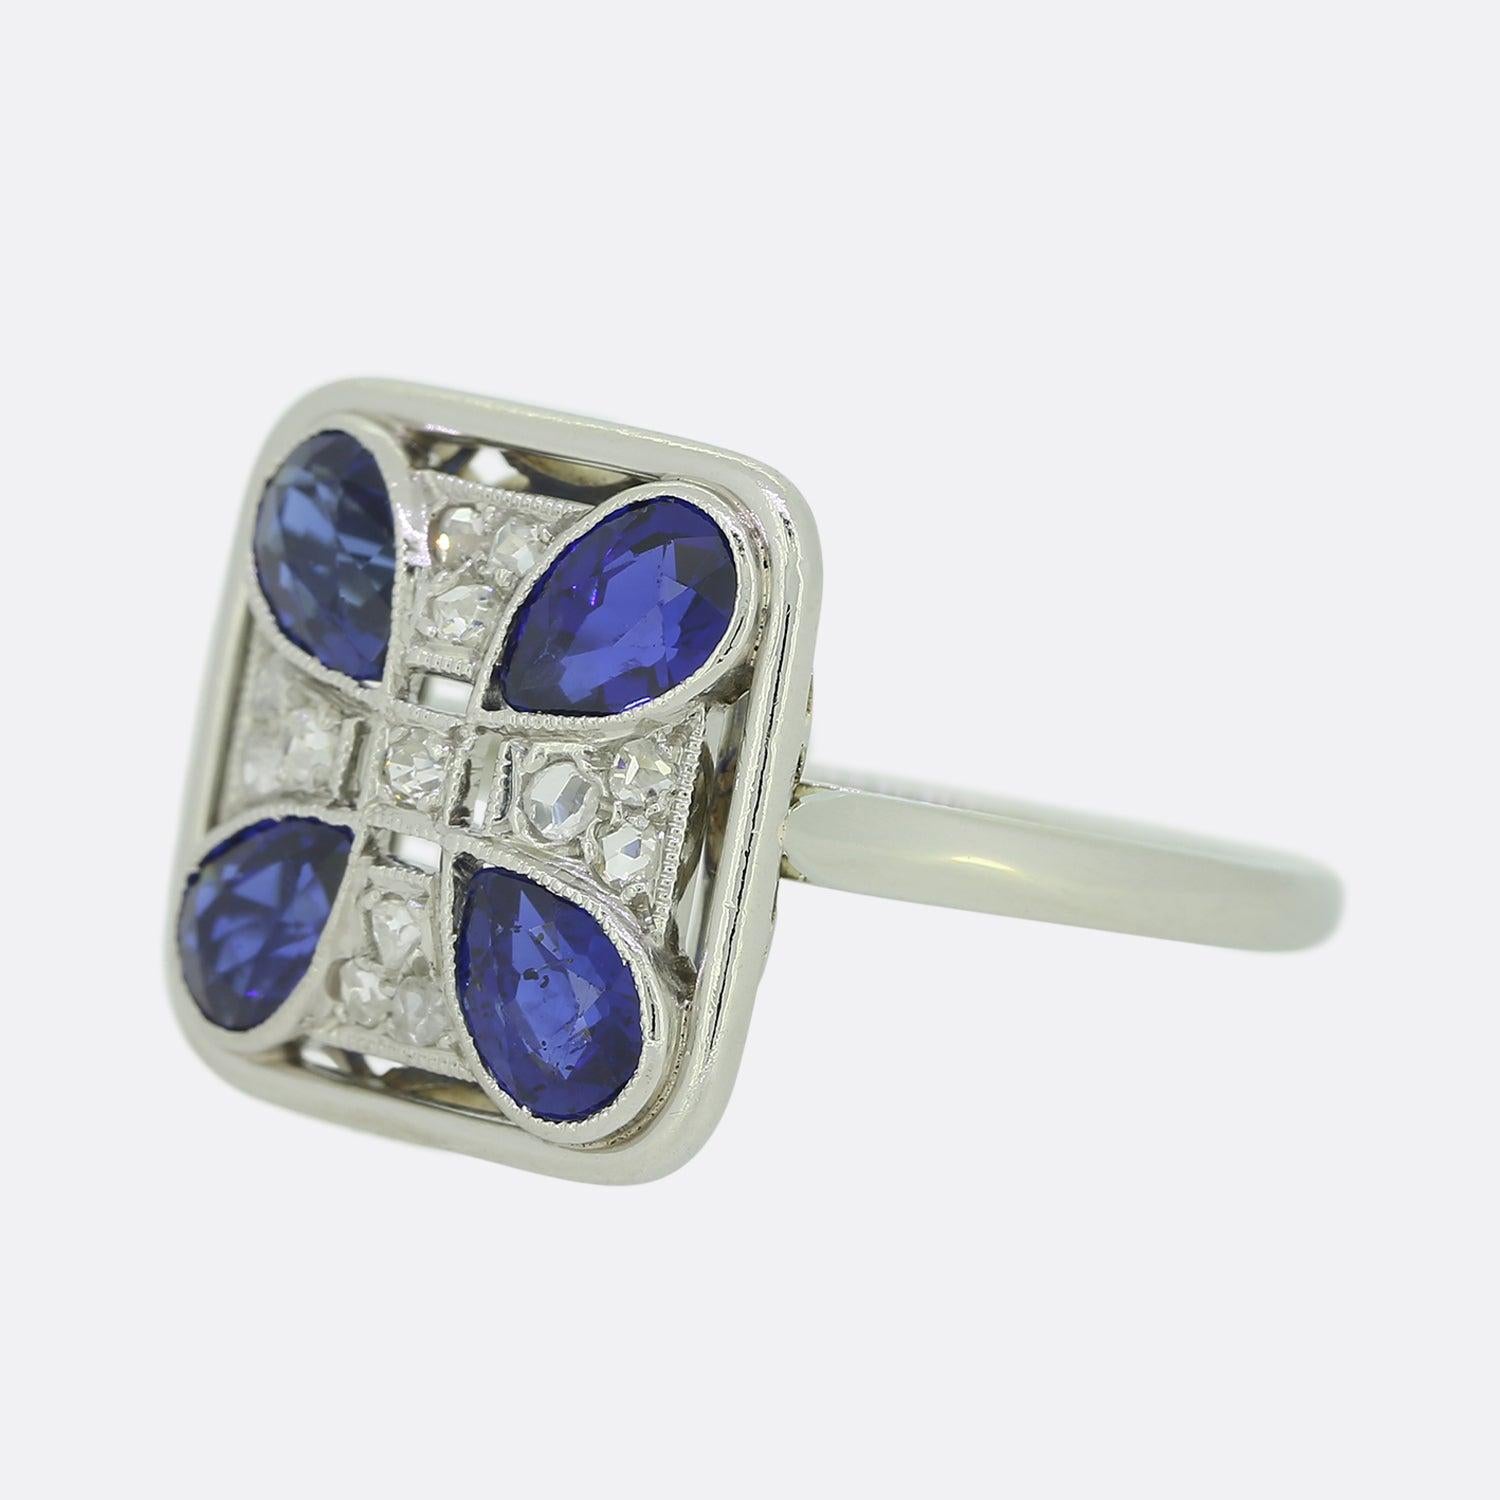 Here we have a wonderful Art Deco sapphire and diamond ring. The head of this unique piece has been crafted into the shape of  a square and showcases multiple layers upon an open structure. Four beautifully deep toned pear shaped sapphires dominate